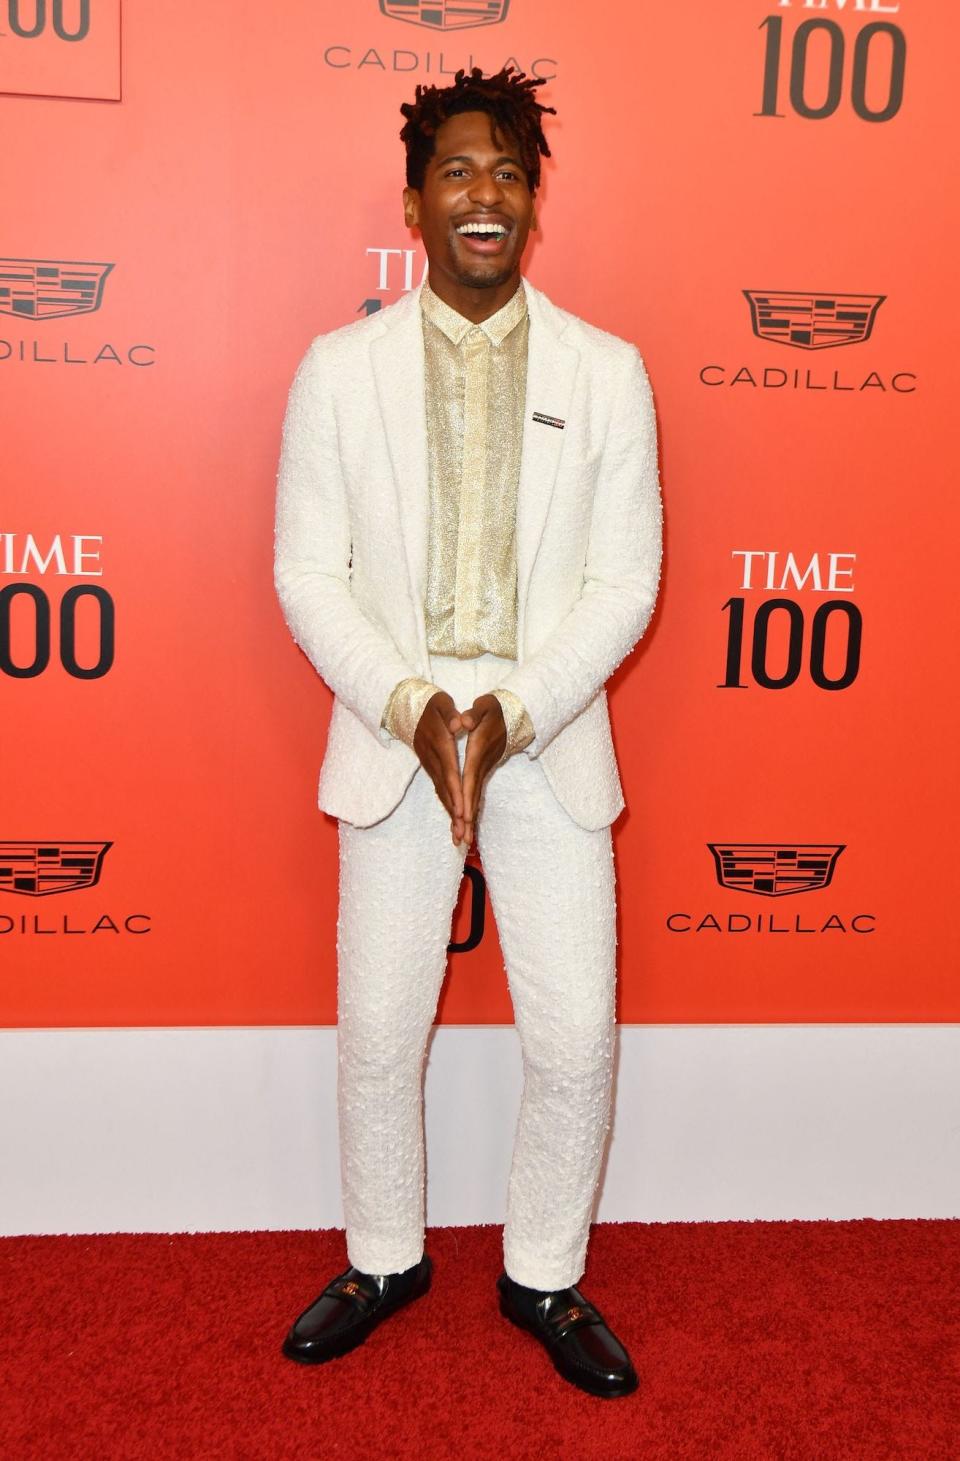 Jon Batiste at the TIME 100 gala in New York City on June 8, 2022.